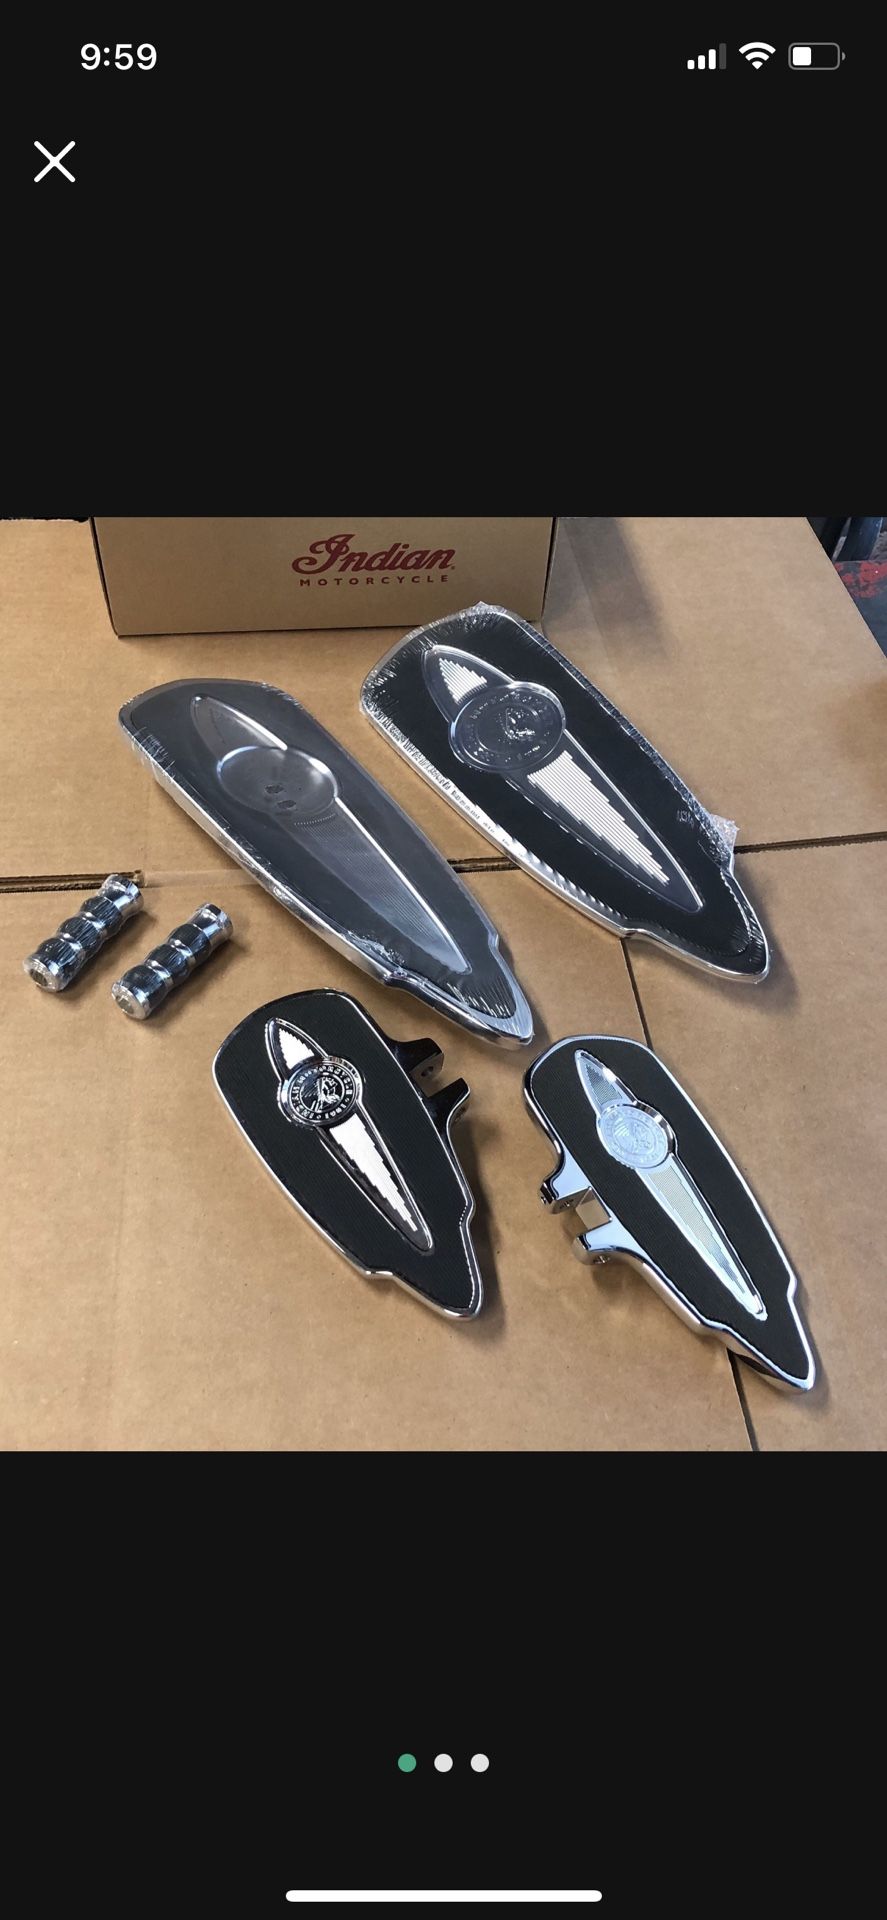 Brand New Indian Motorcycle floorboards set, includes pegs